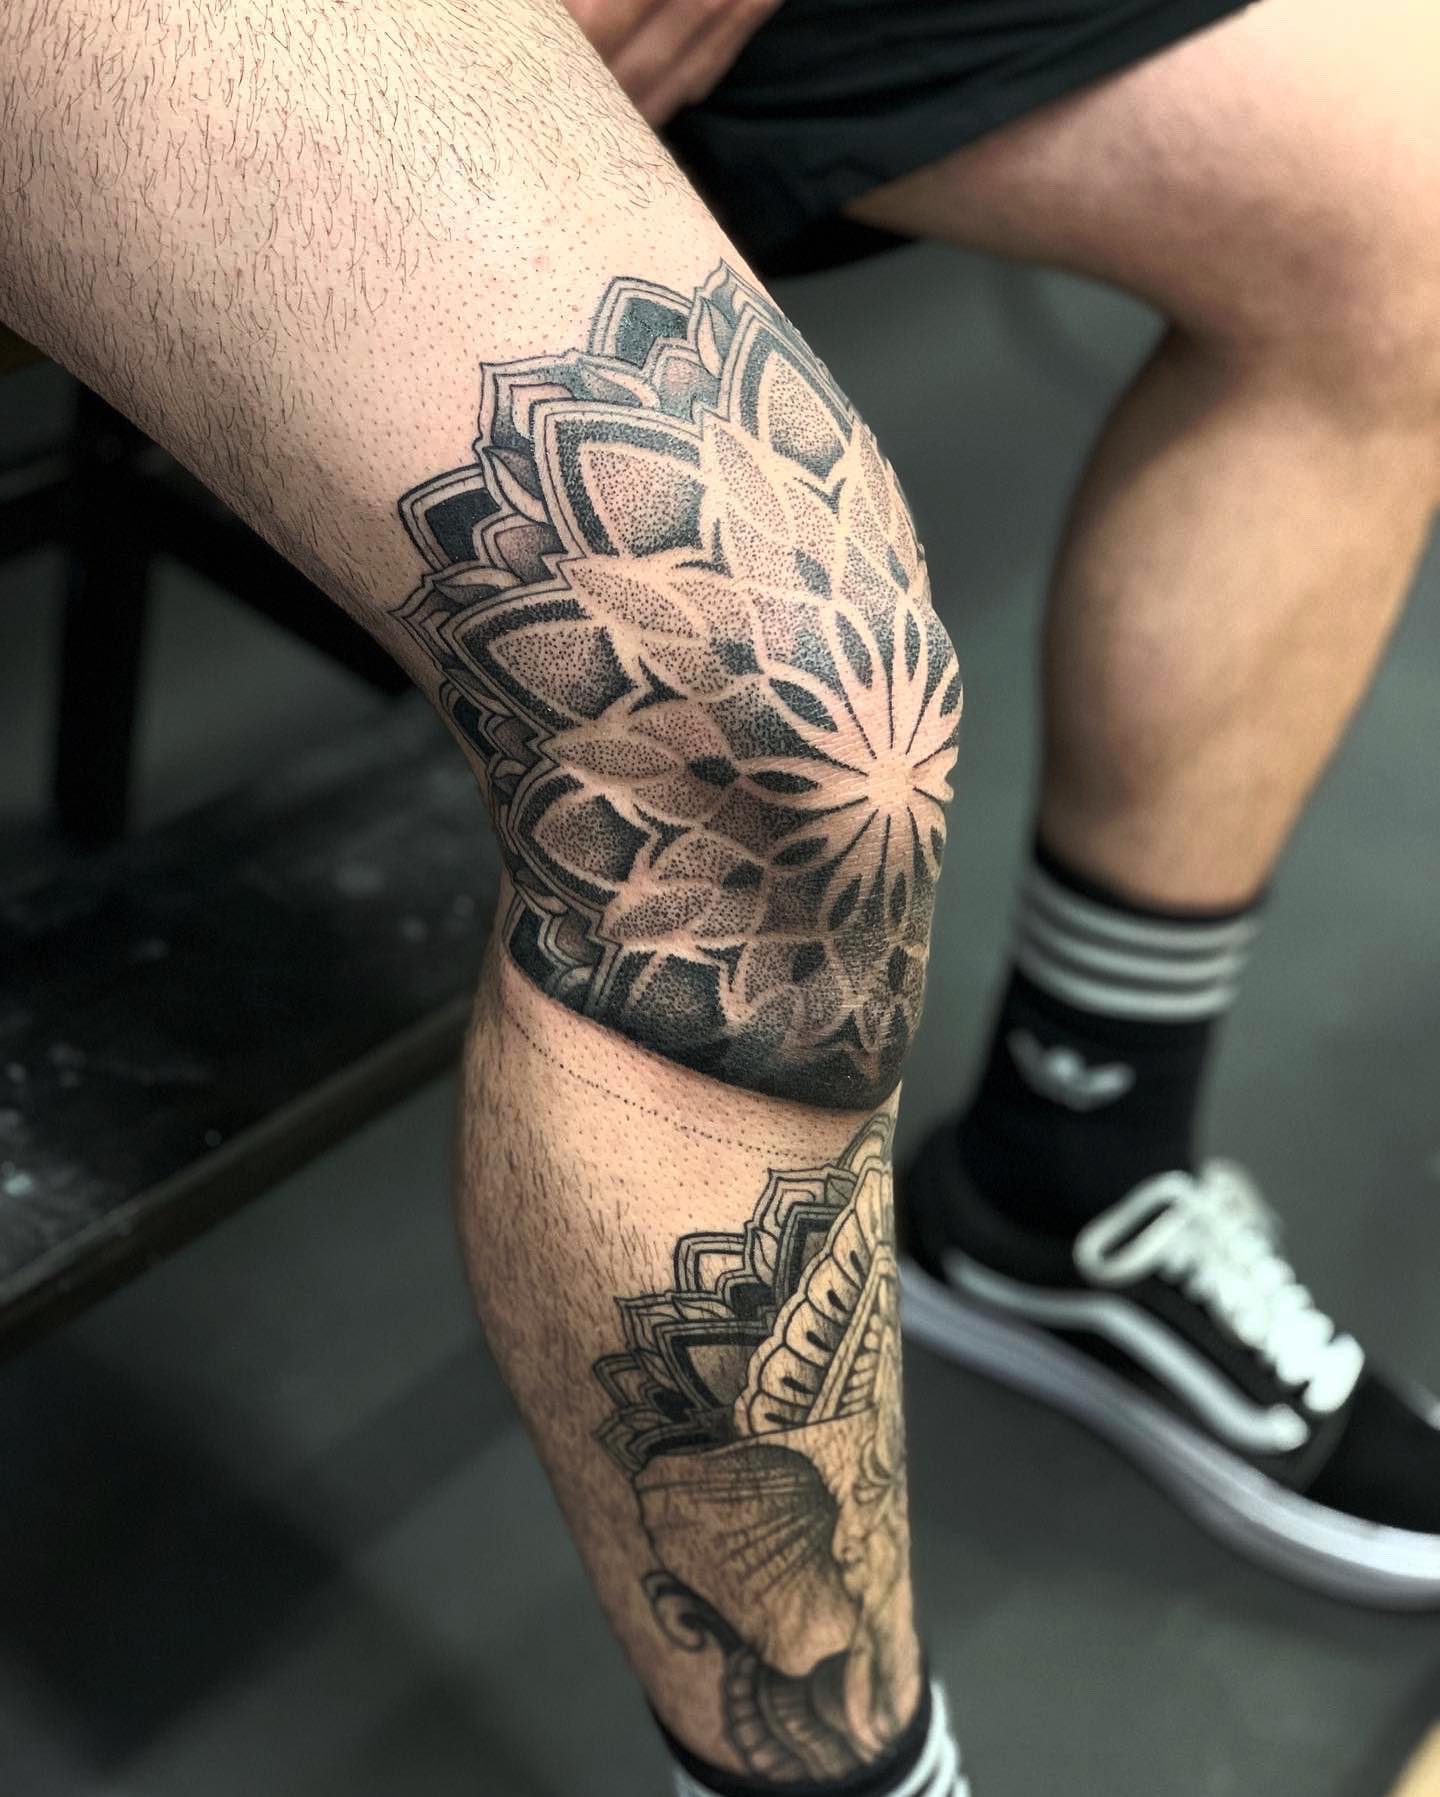 Wesche Tattoo  Knee mandala finished in one session  Facebook